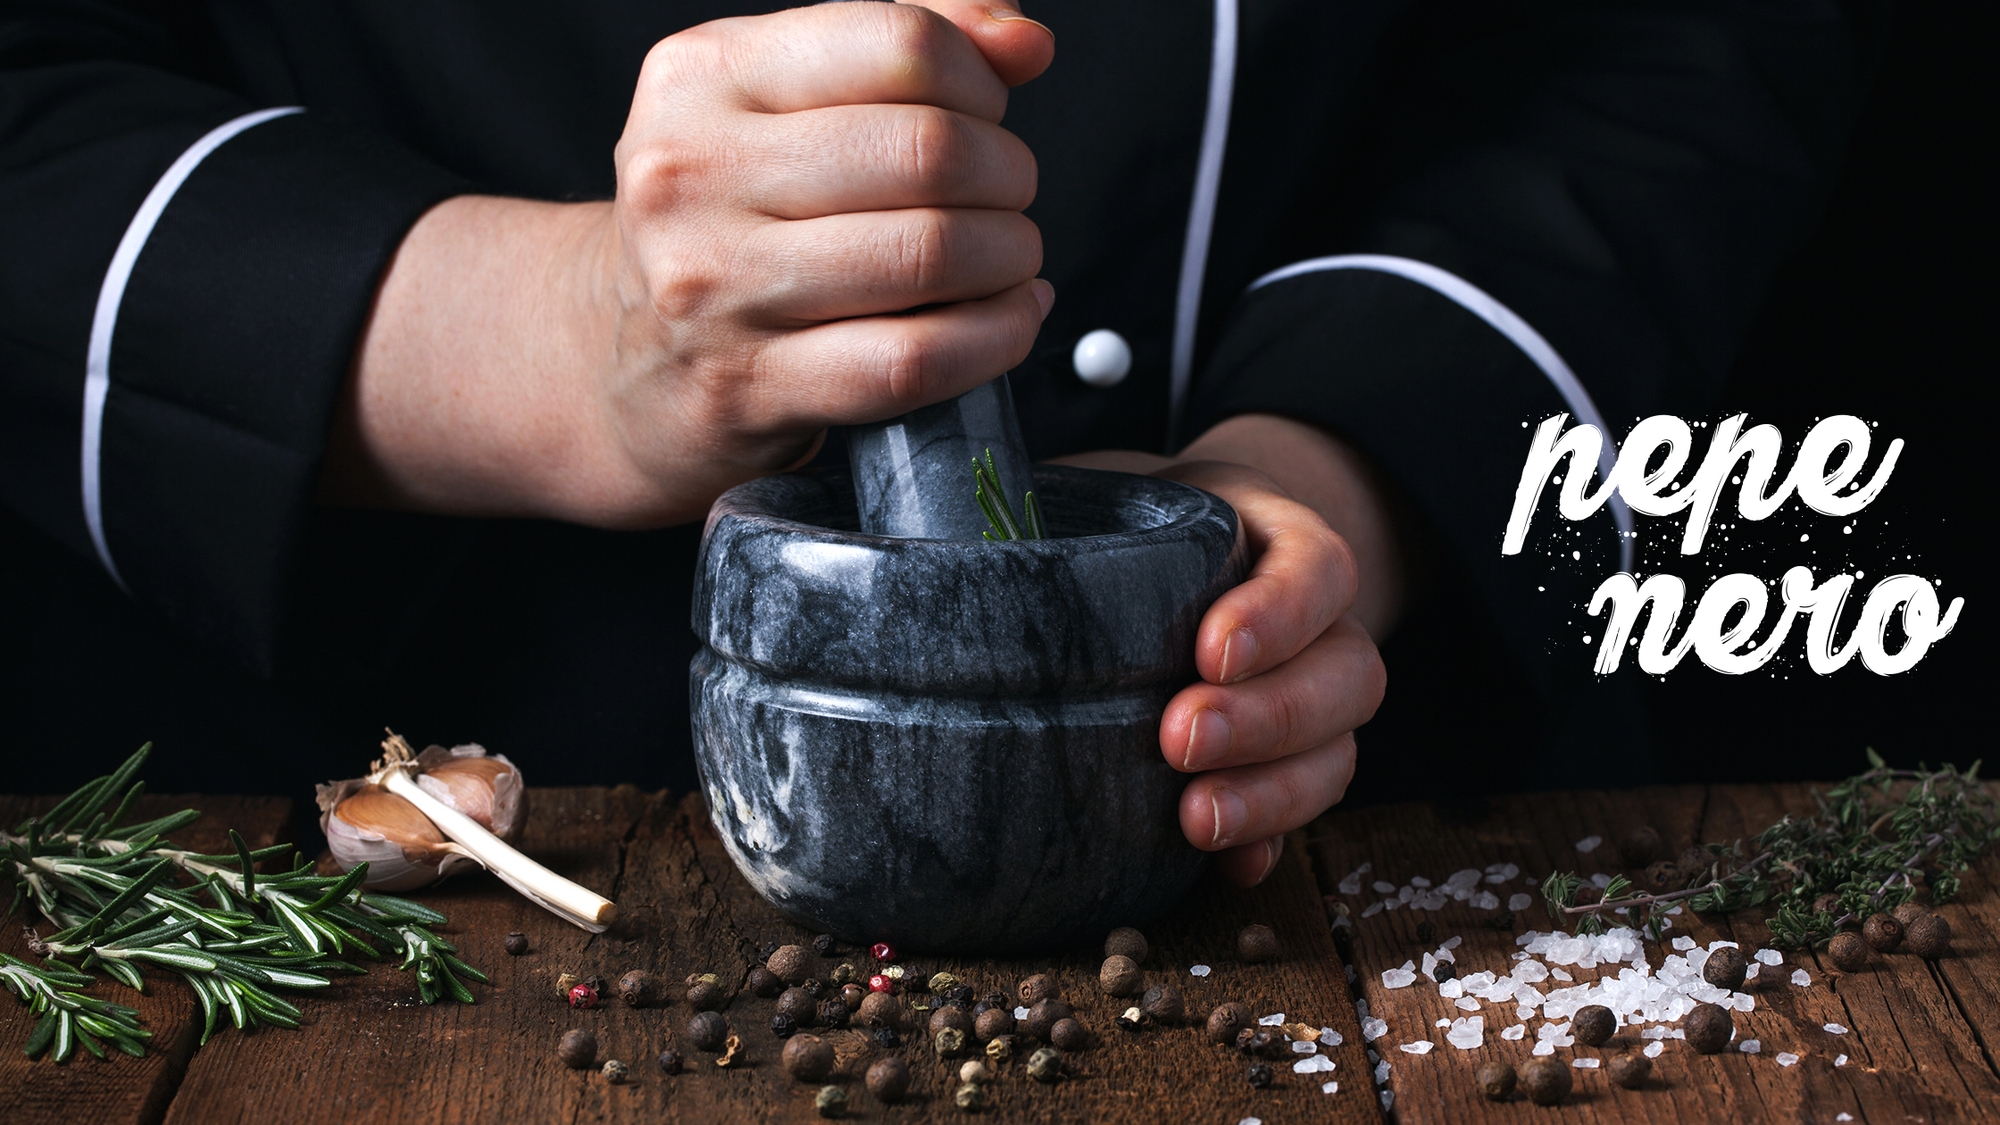 Why Should You Use a Mortar and Pestle Instead of a Blender: The Benefits of Traditional Grinding